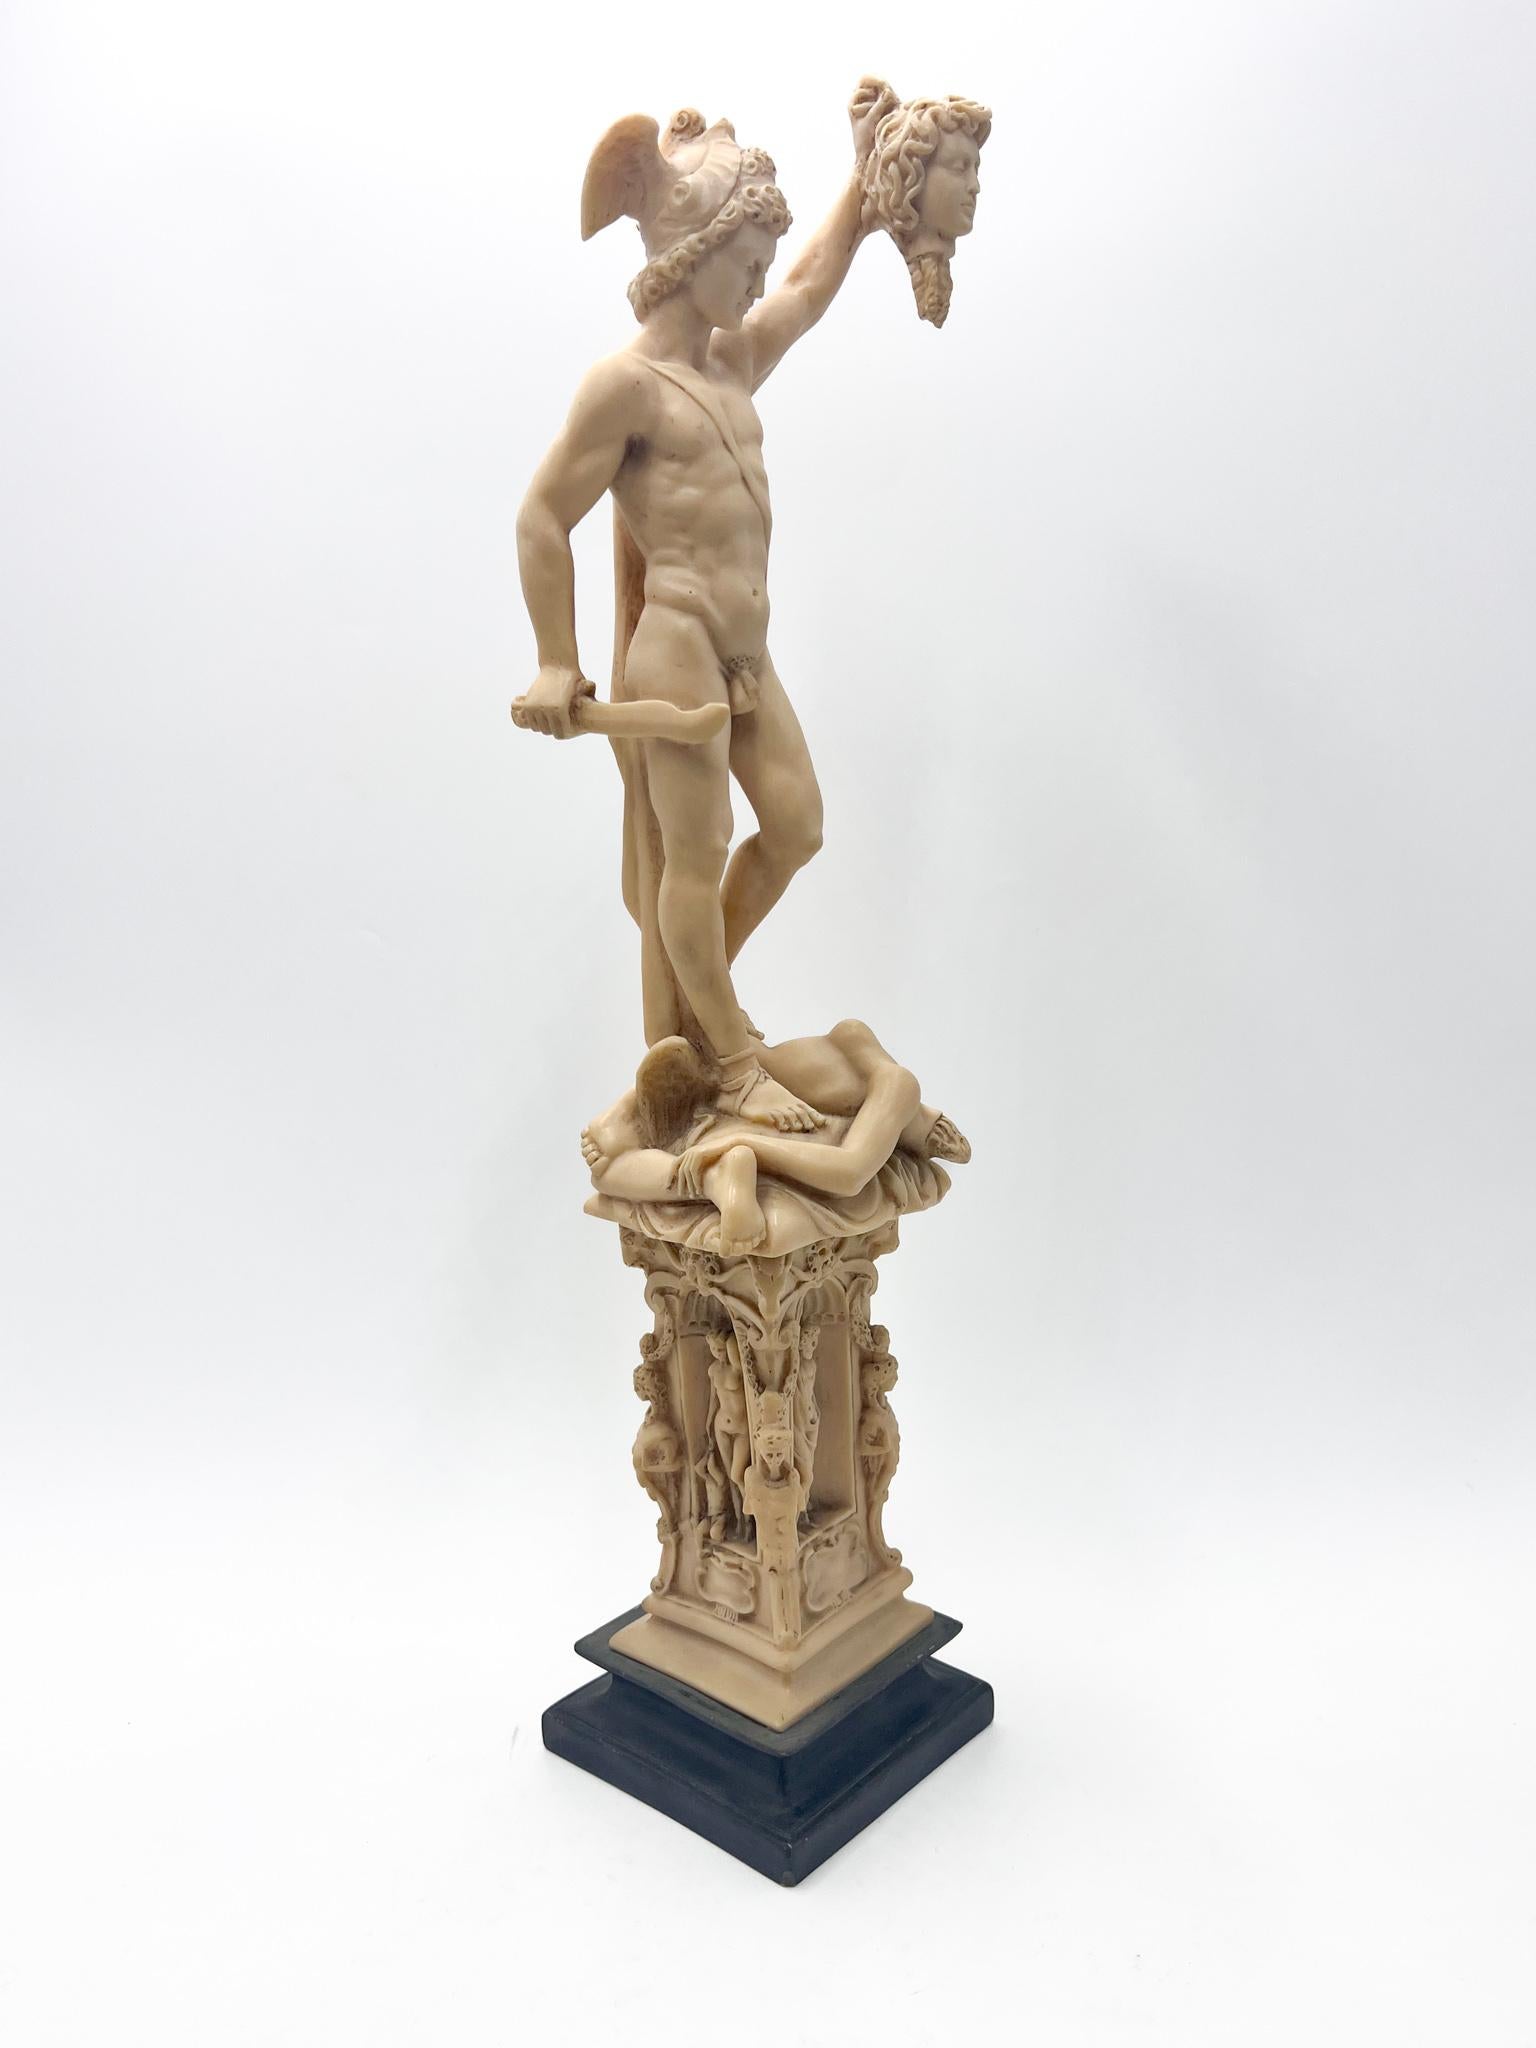 Neoclassical Resin Sculpture Depicting Perseus from the 50s